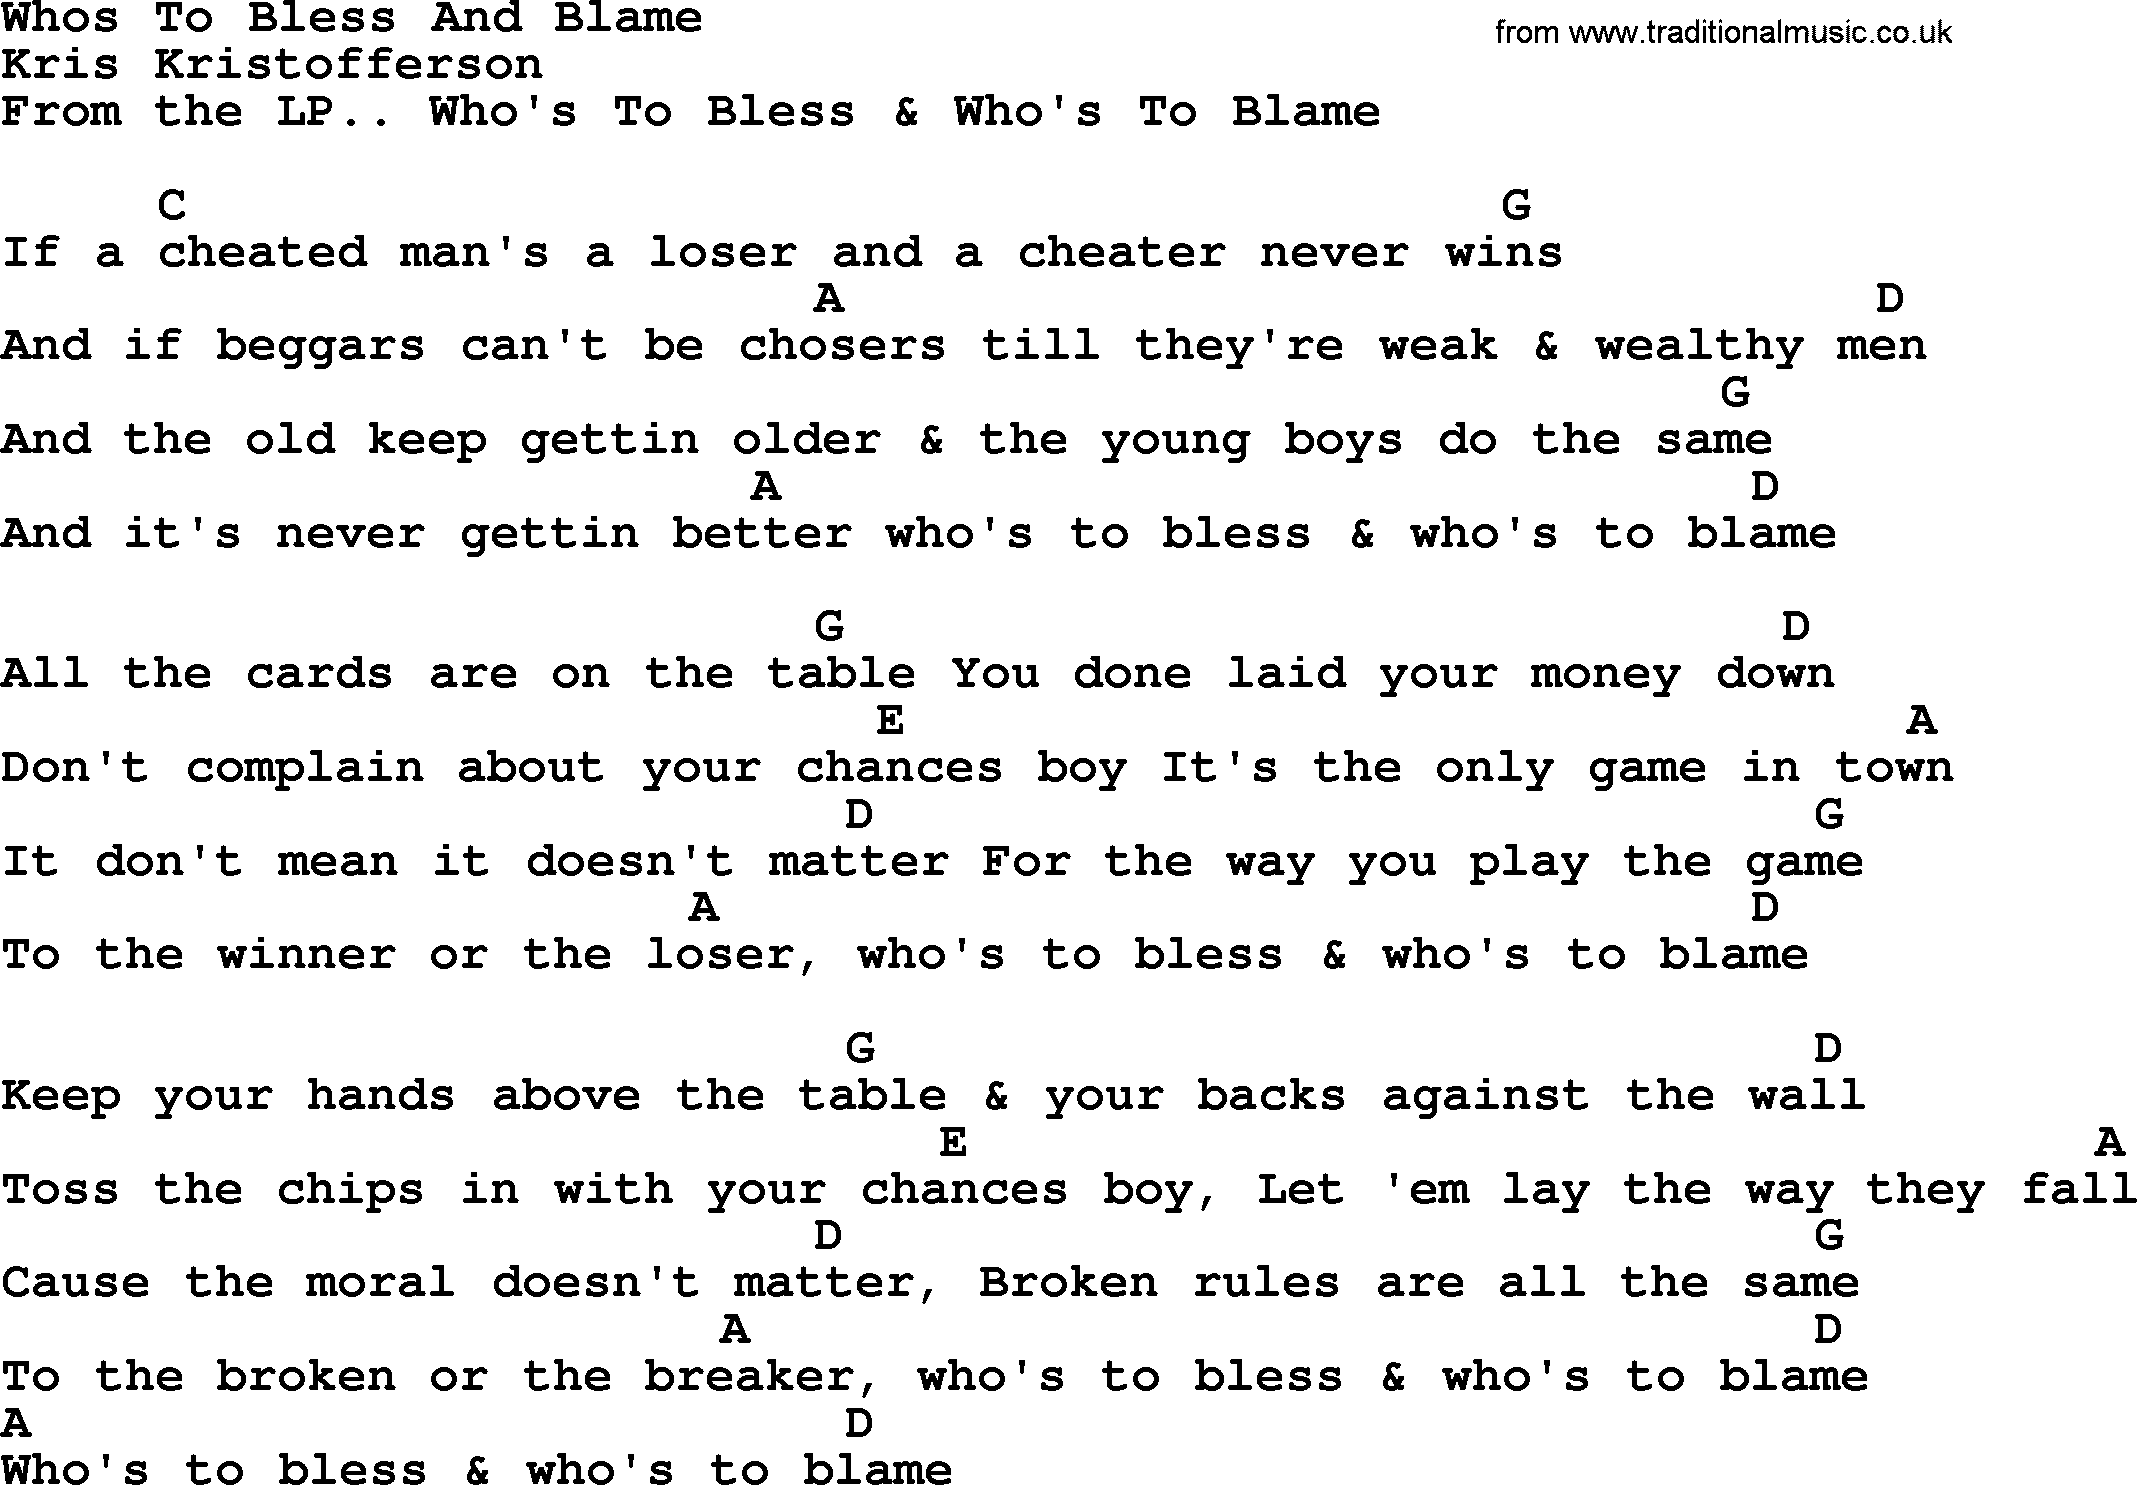 Kris Kristofferson song: Whos To Bless And Blame lyrics and chords